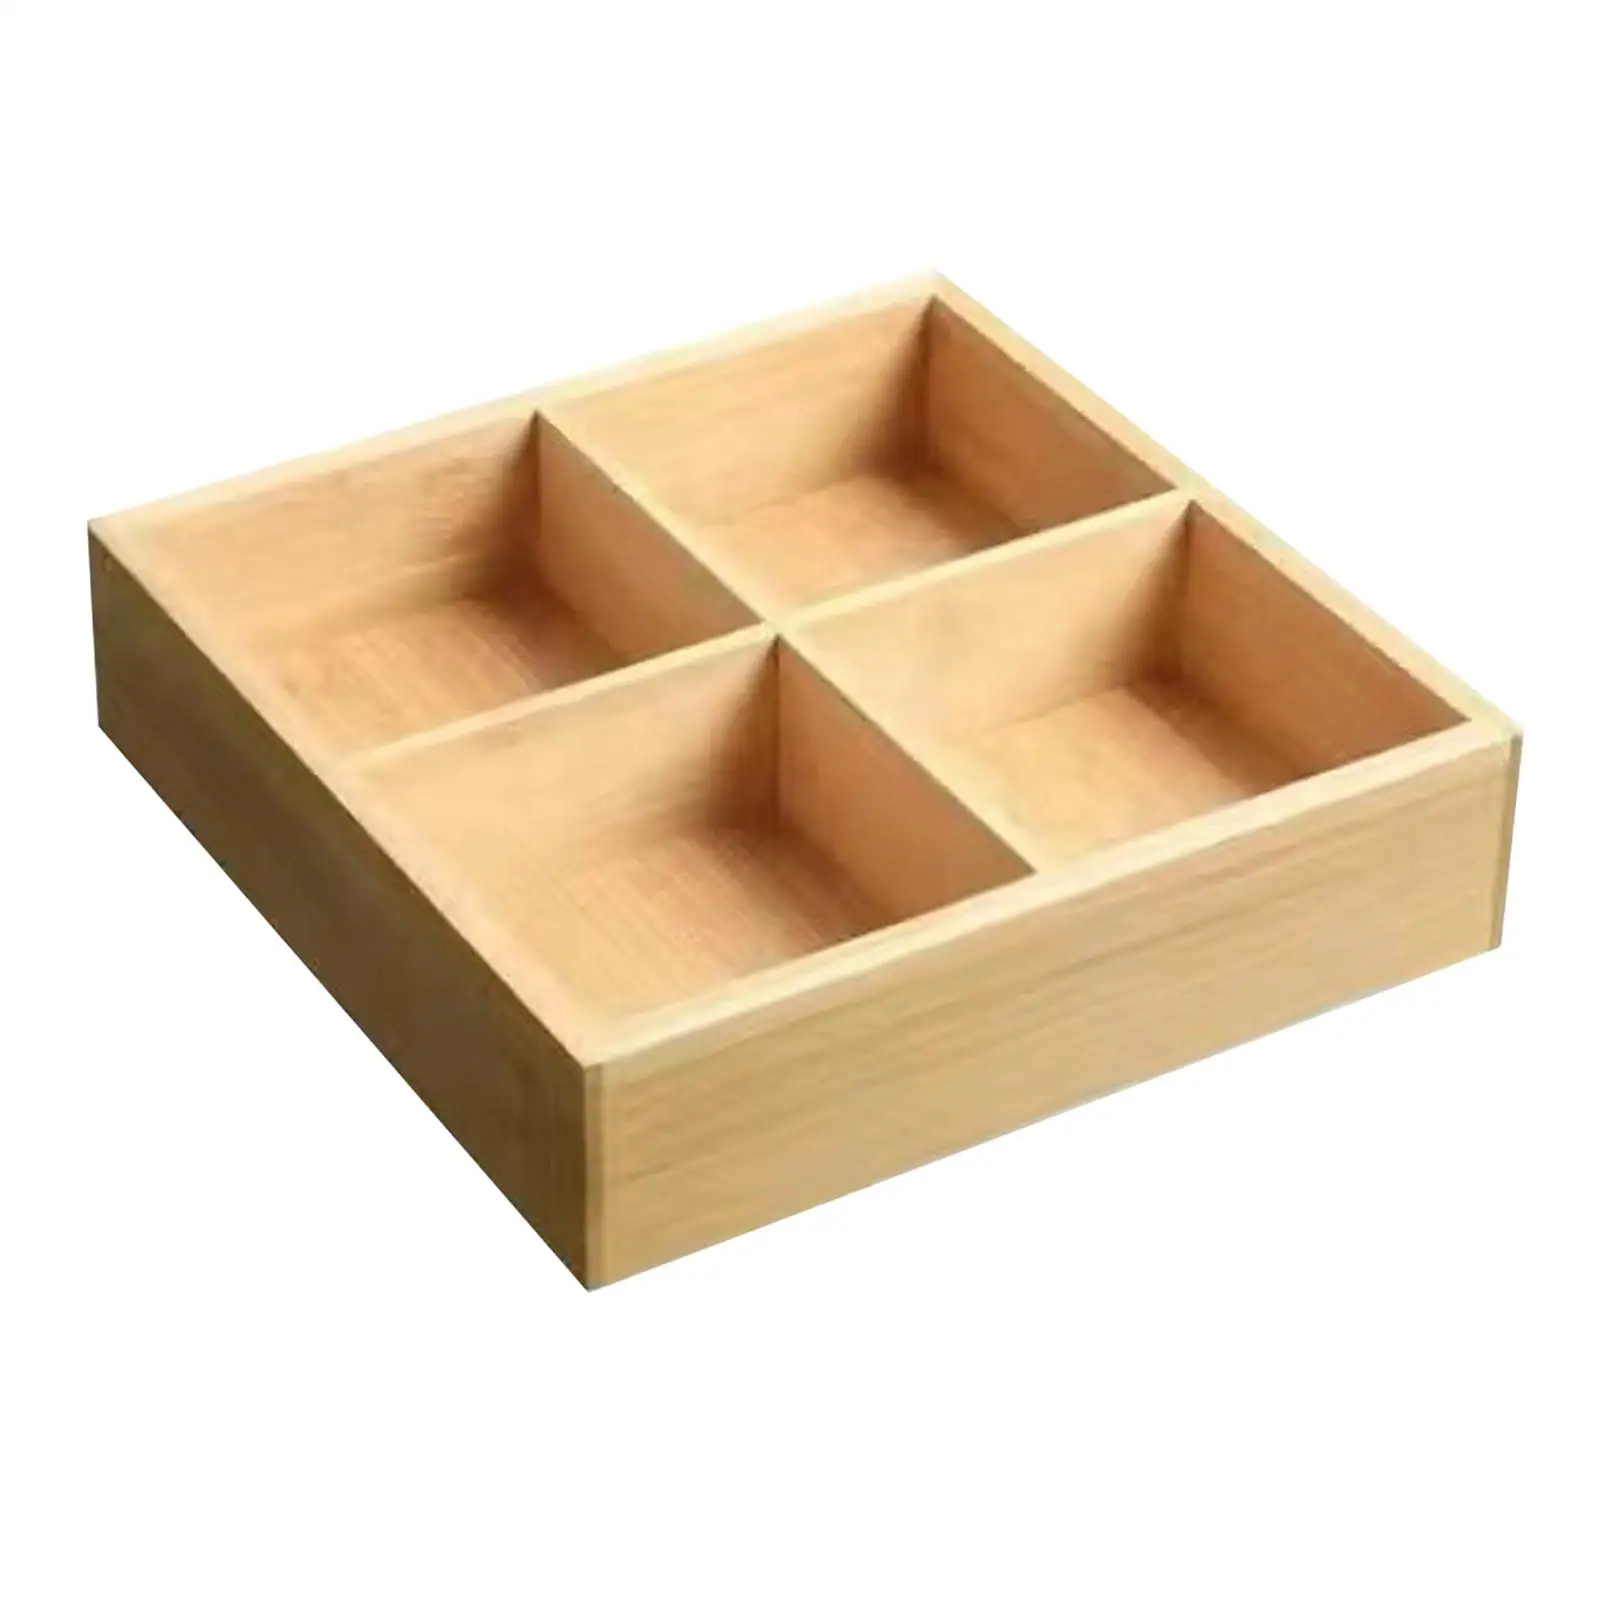 Wooden Dried Fruit Box Snack Tray with 4 Compartments for Homes, Restaurants, Office Parties, Banquet Facilities Versatile